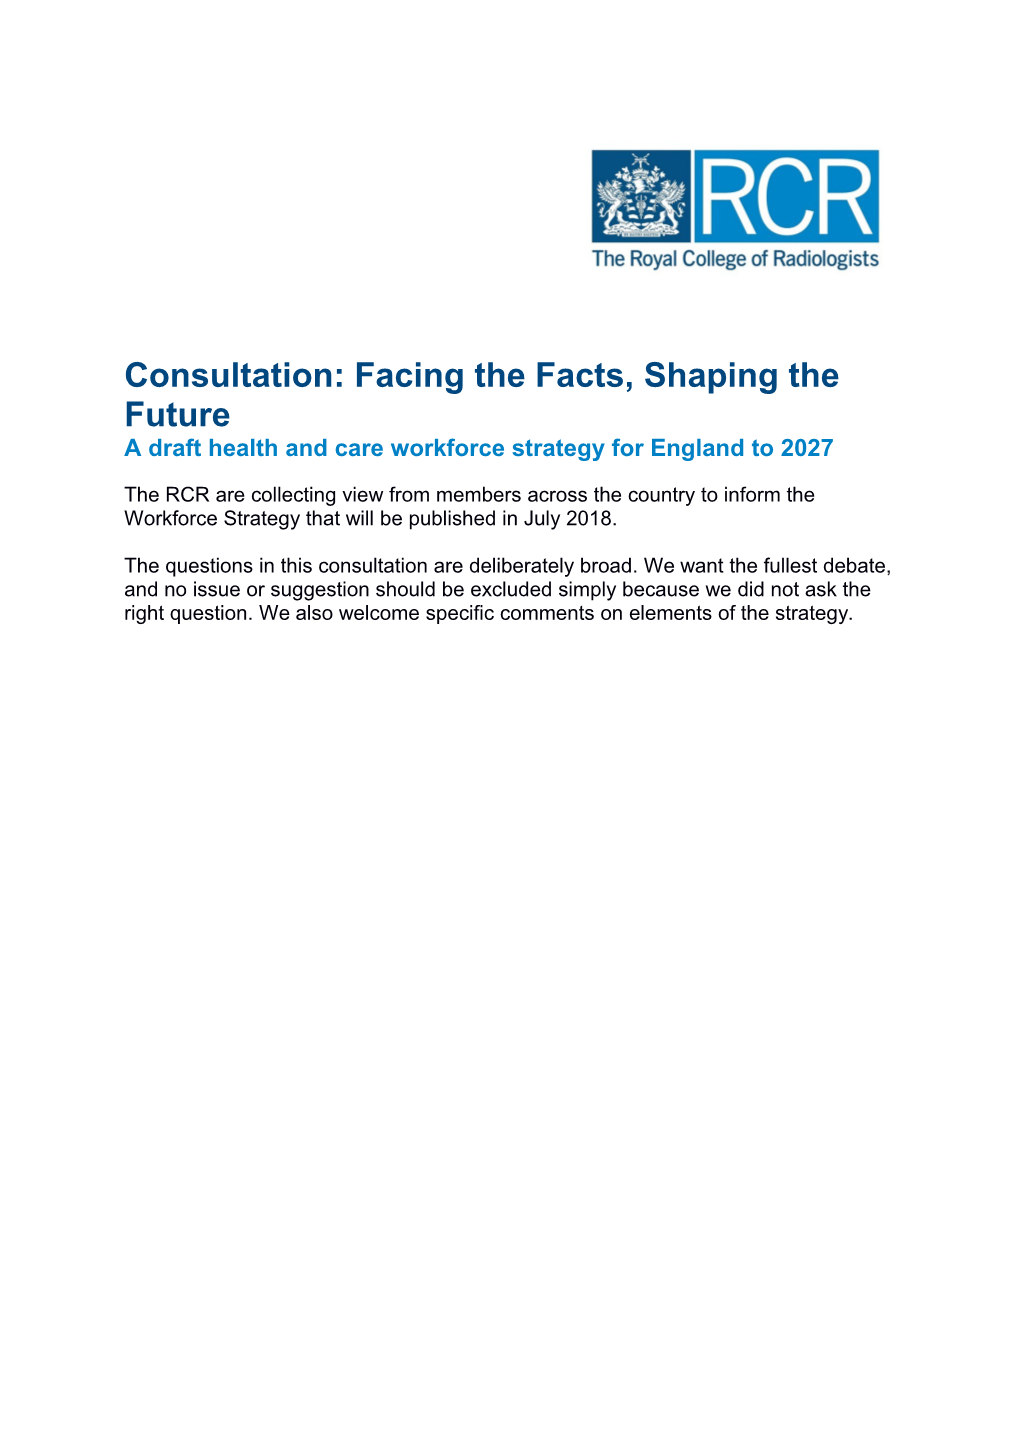 Consultation: Facing the Facts, Shaping the Future